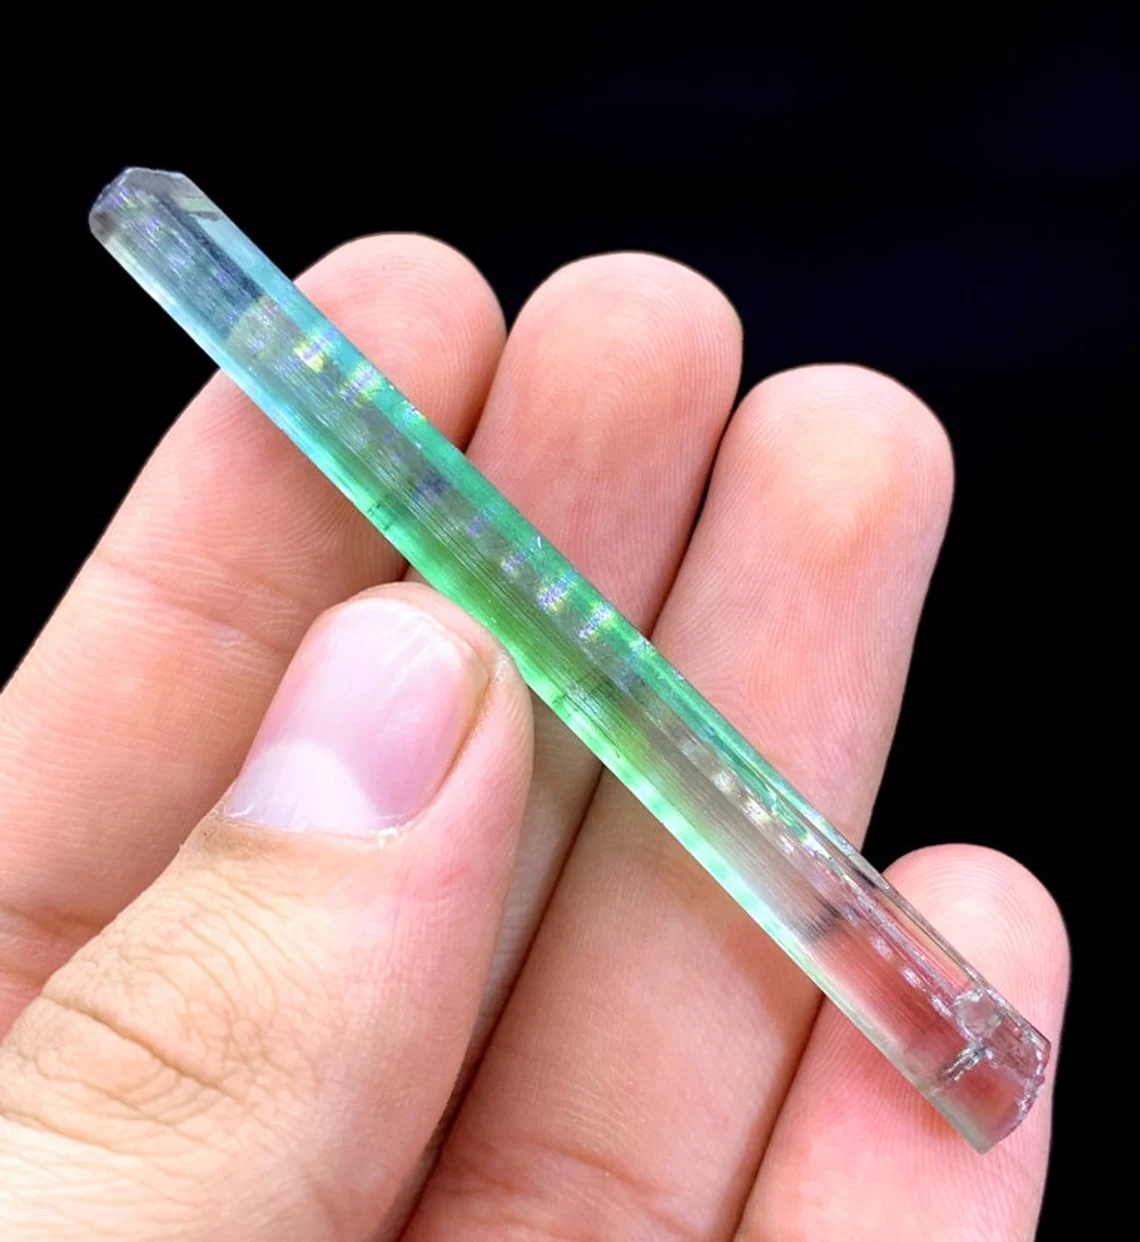 Natural Terminated Tricolor Tourmaline Crystal From Paproke Afghanistan - 33.05 cts